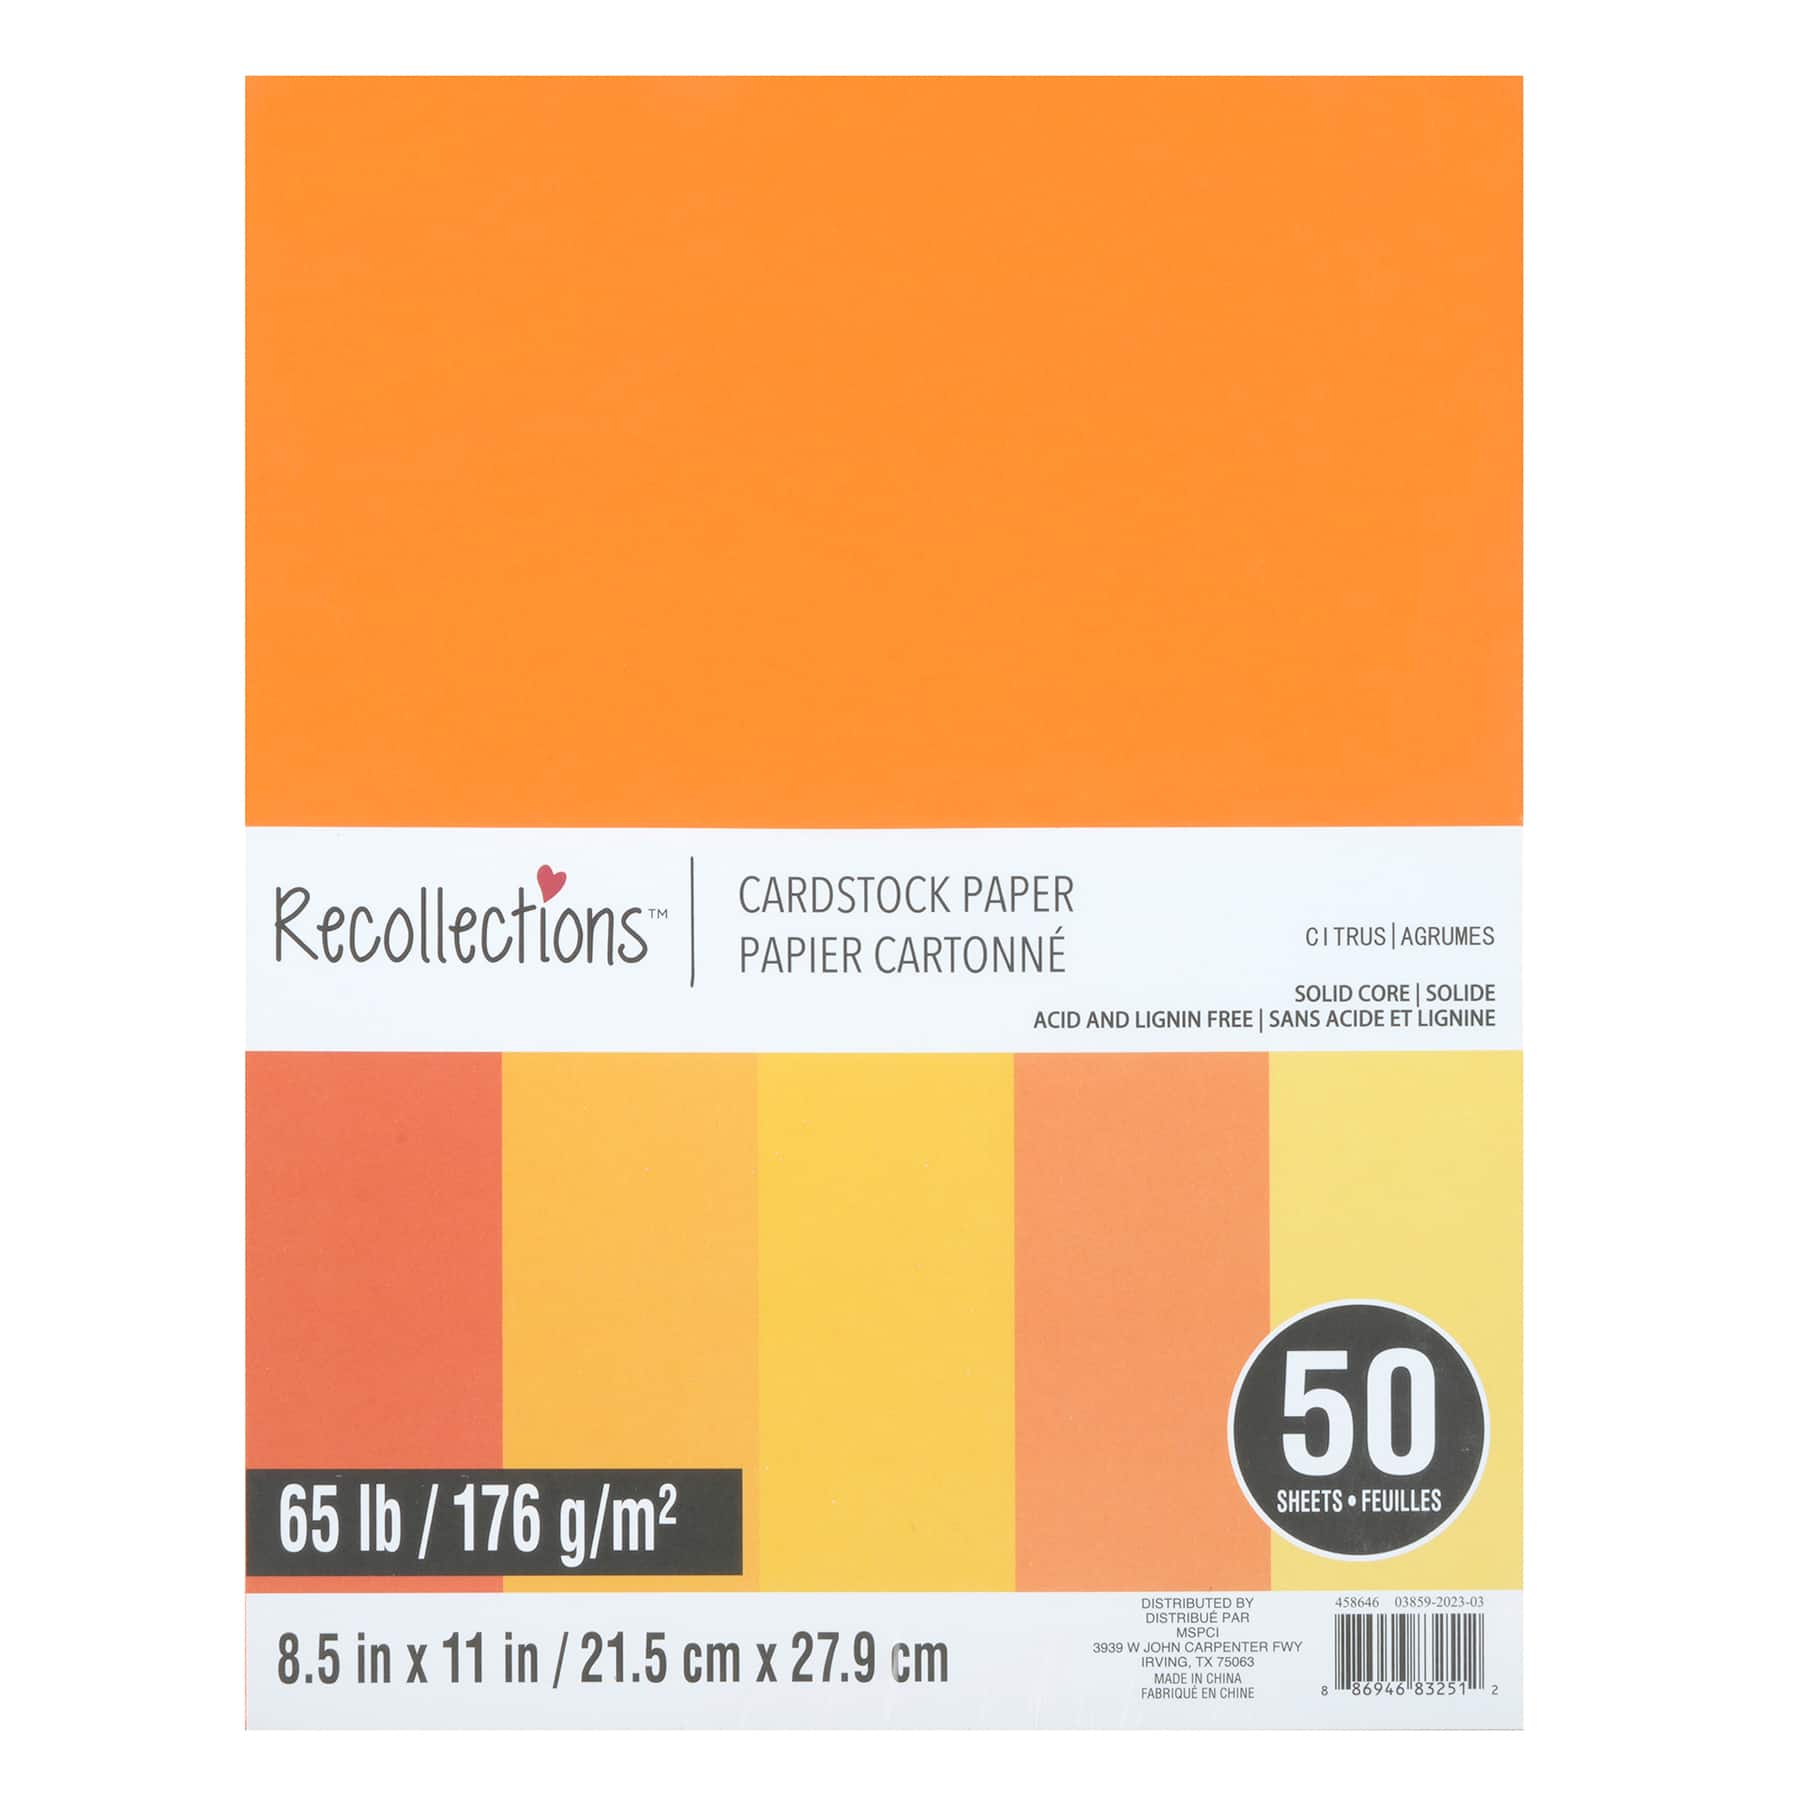 12 Packs: 100 ct. (1,200 total) Primary 4.5 x 7 Cardstock Paper by  Recollections™